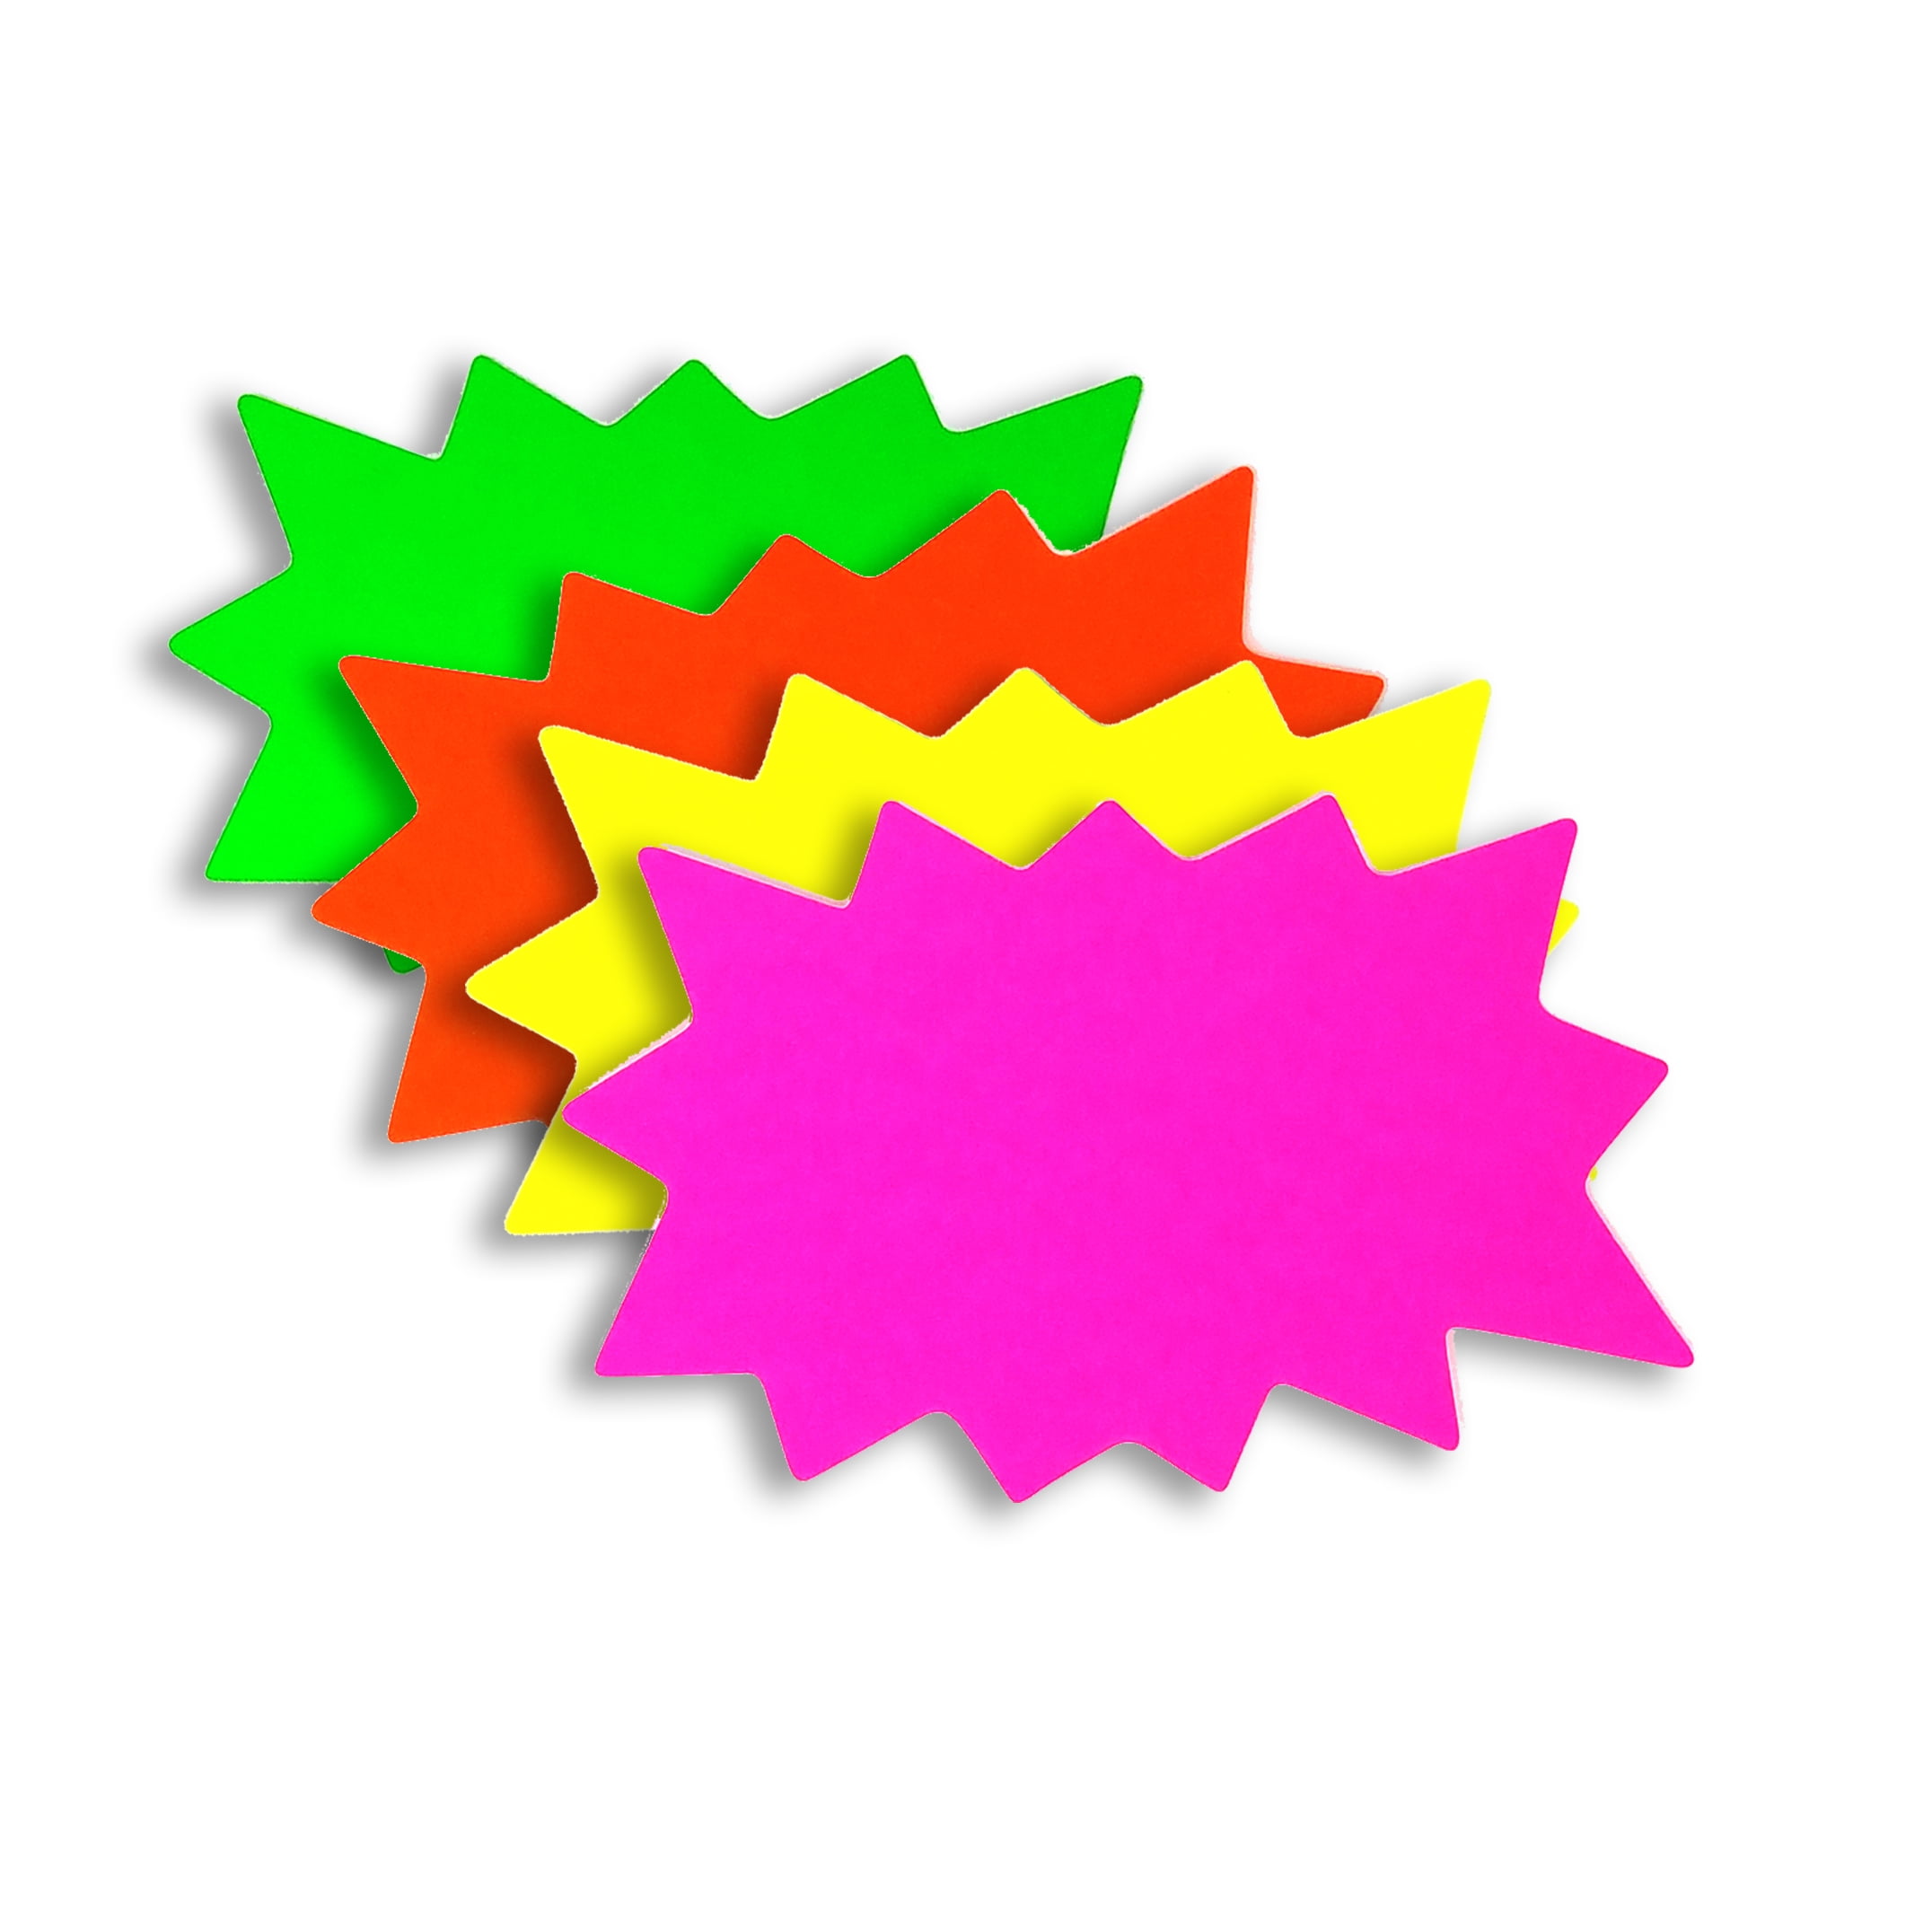 10 pack x 12 Fluorescent 6 Inch Flash Stars Shop Signs for Retail Display Tags 